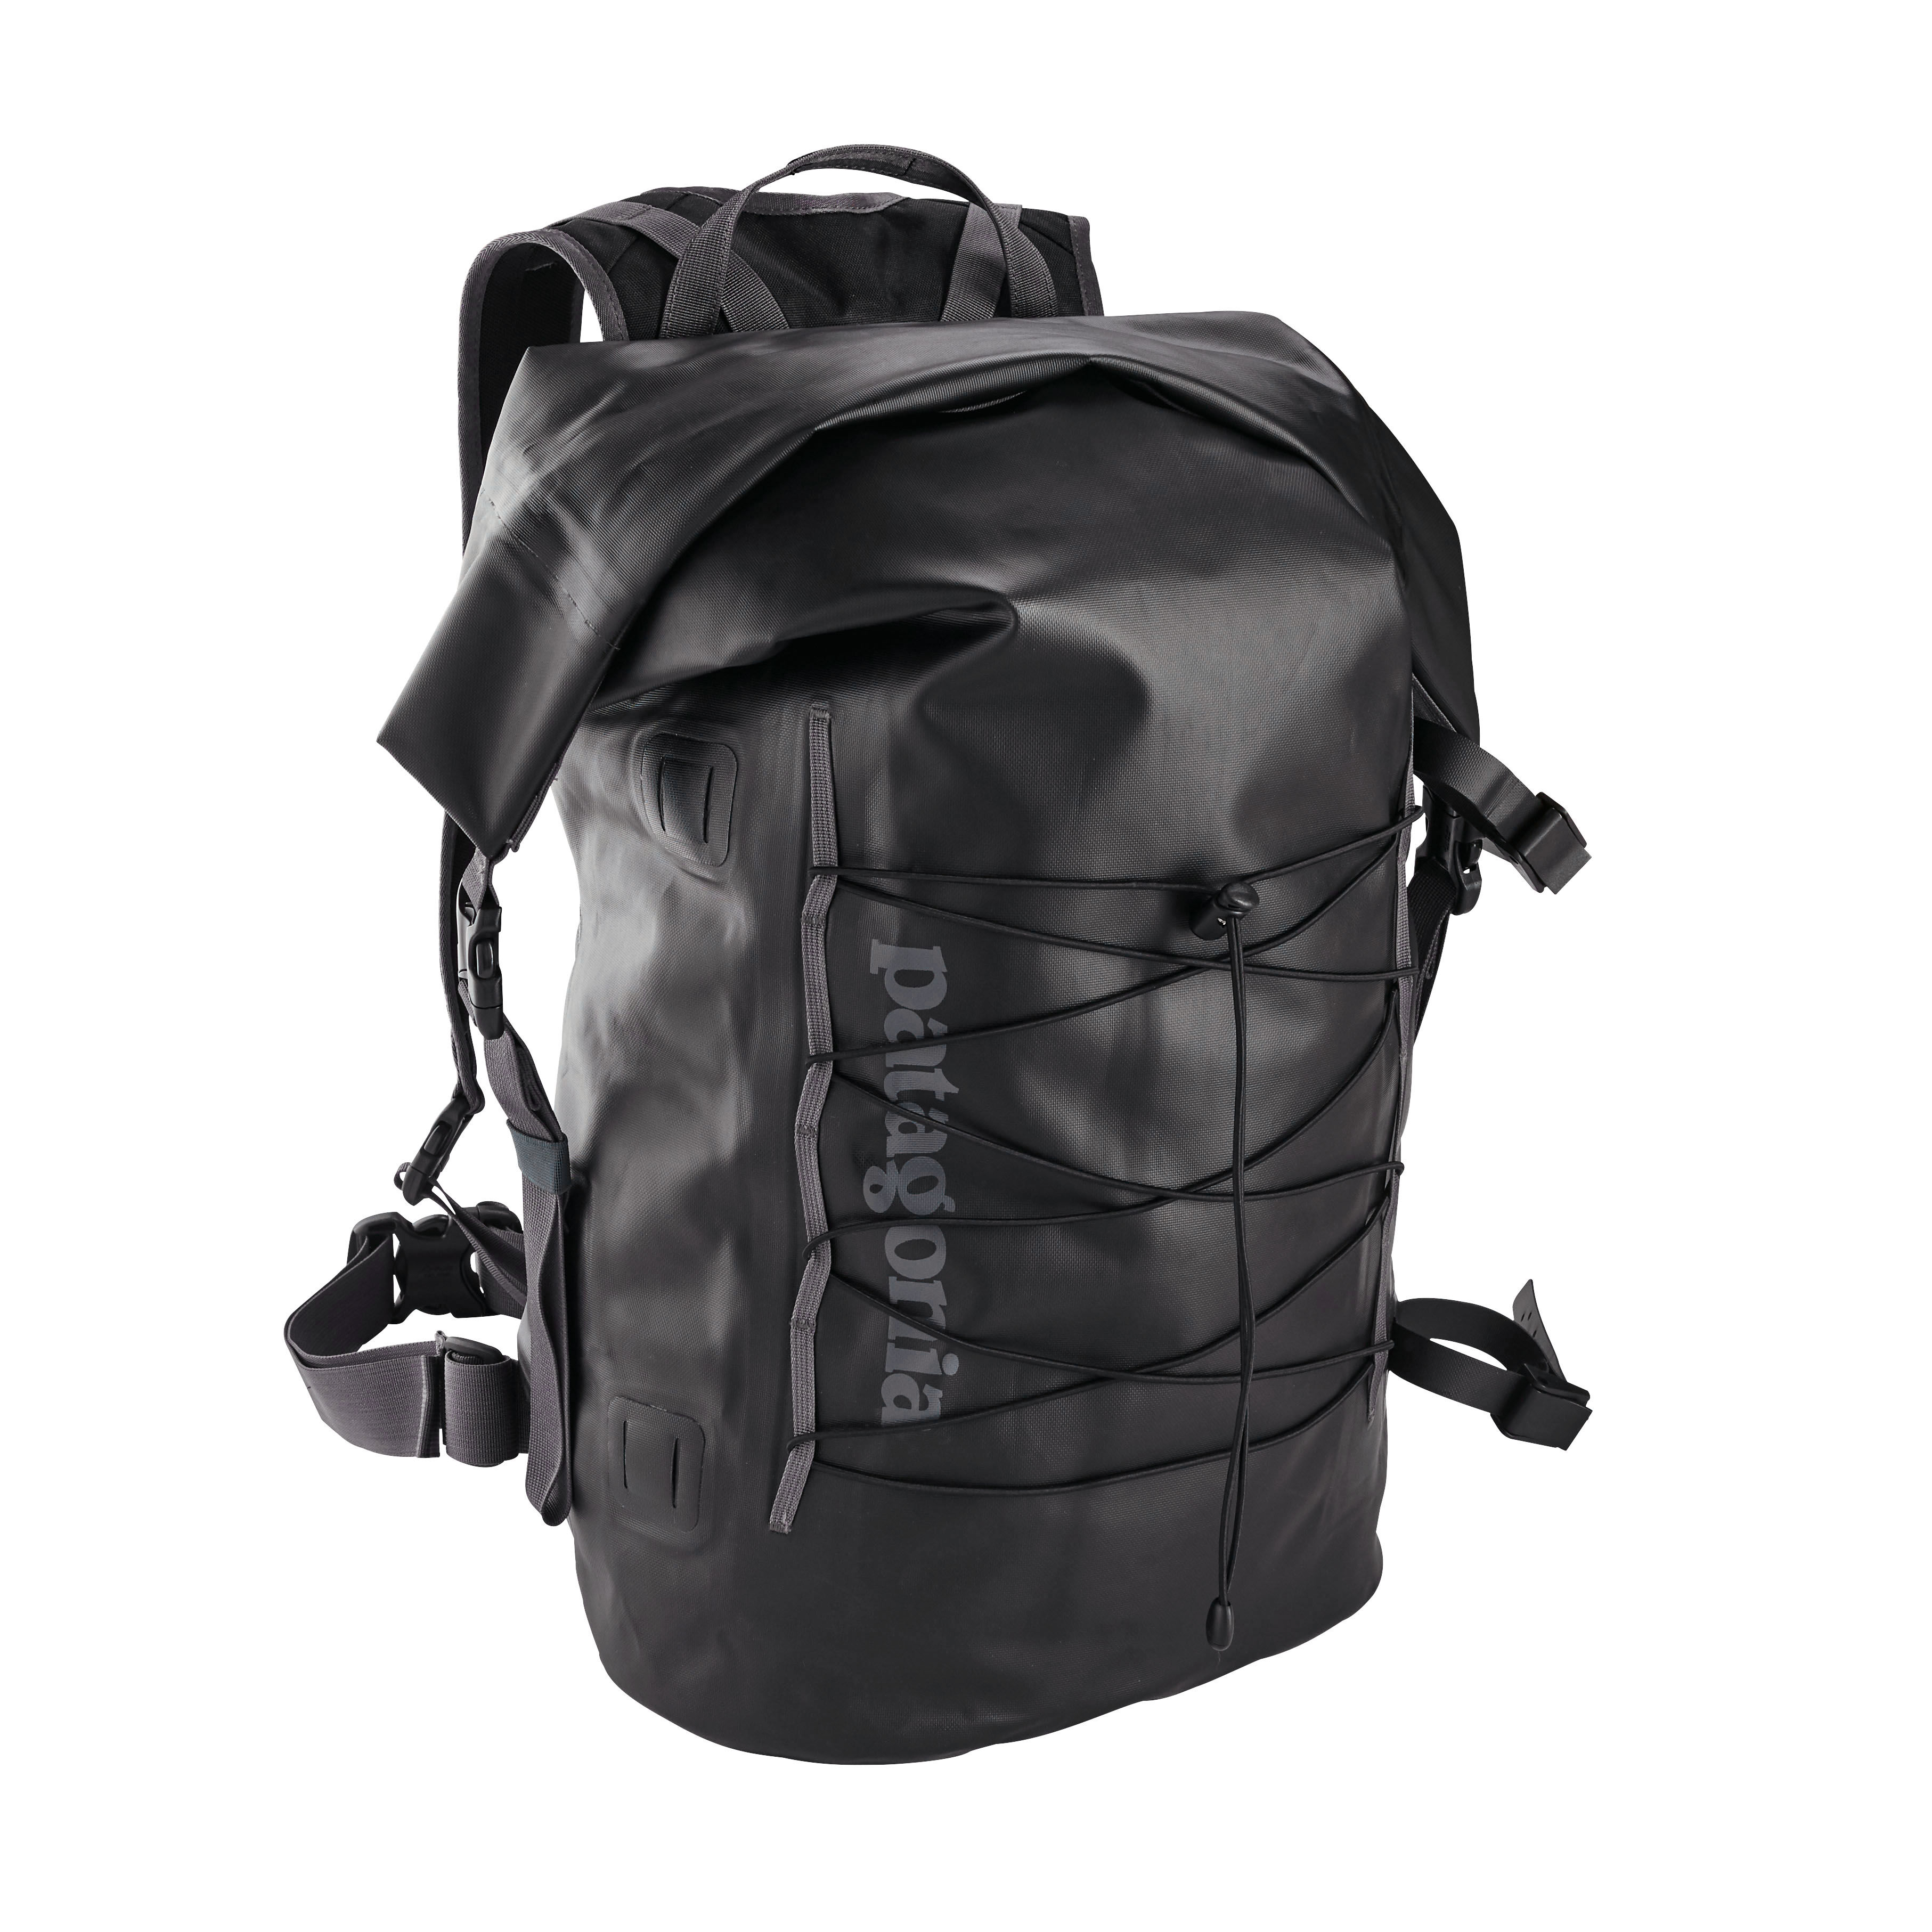 Patagonia - Stormfront Roll Top Pack 45 L - Zaino